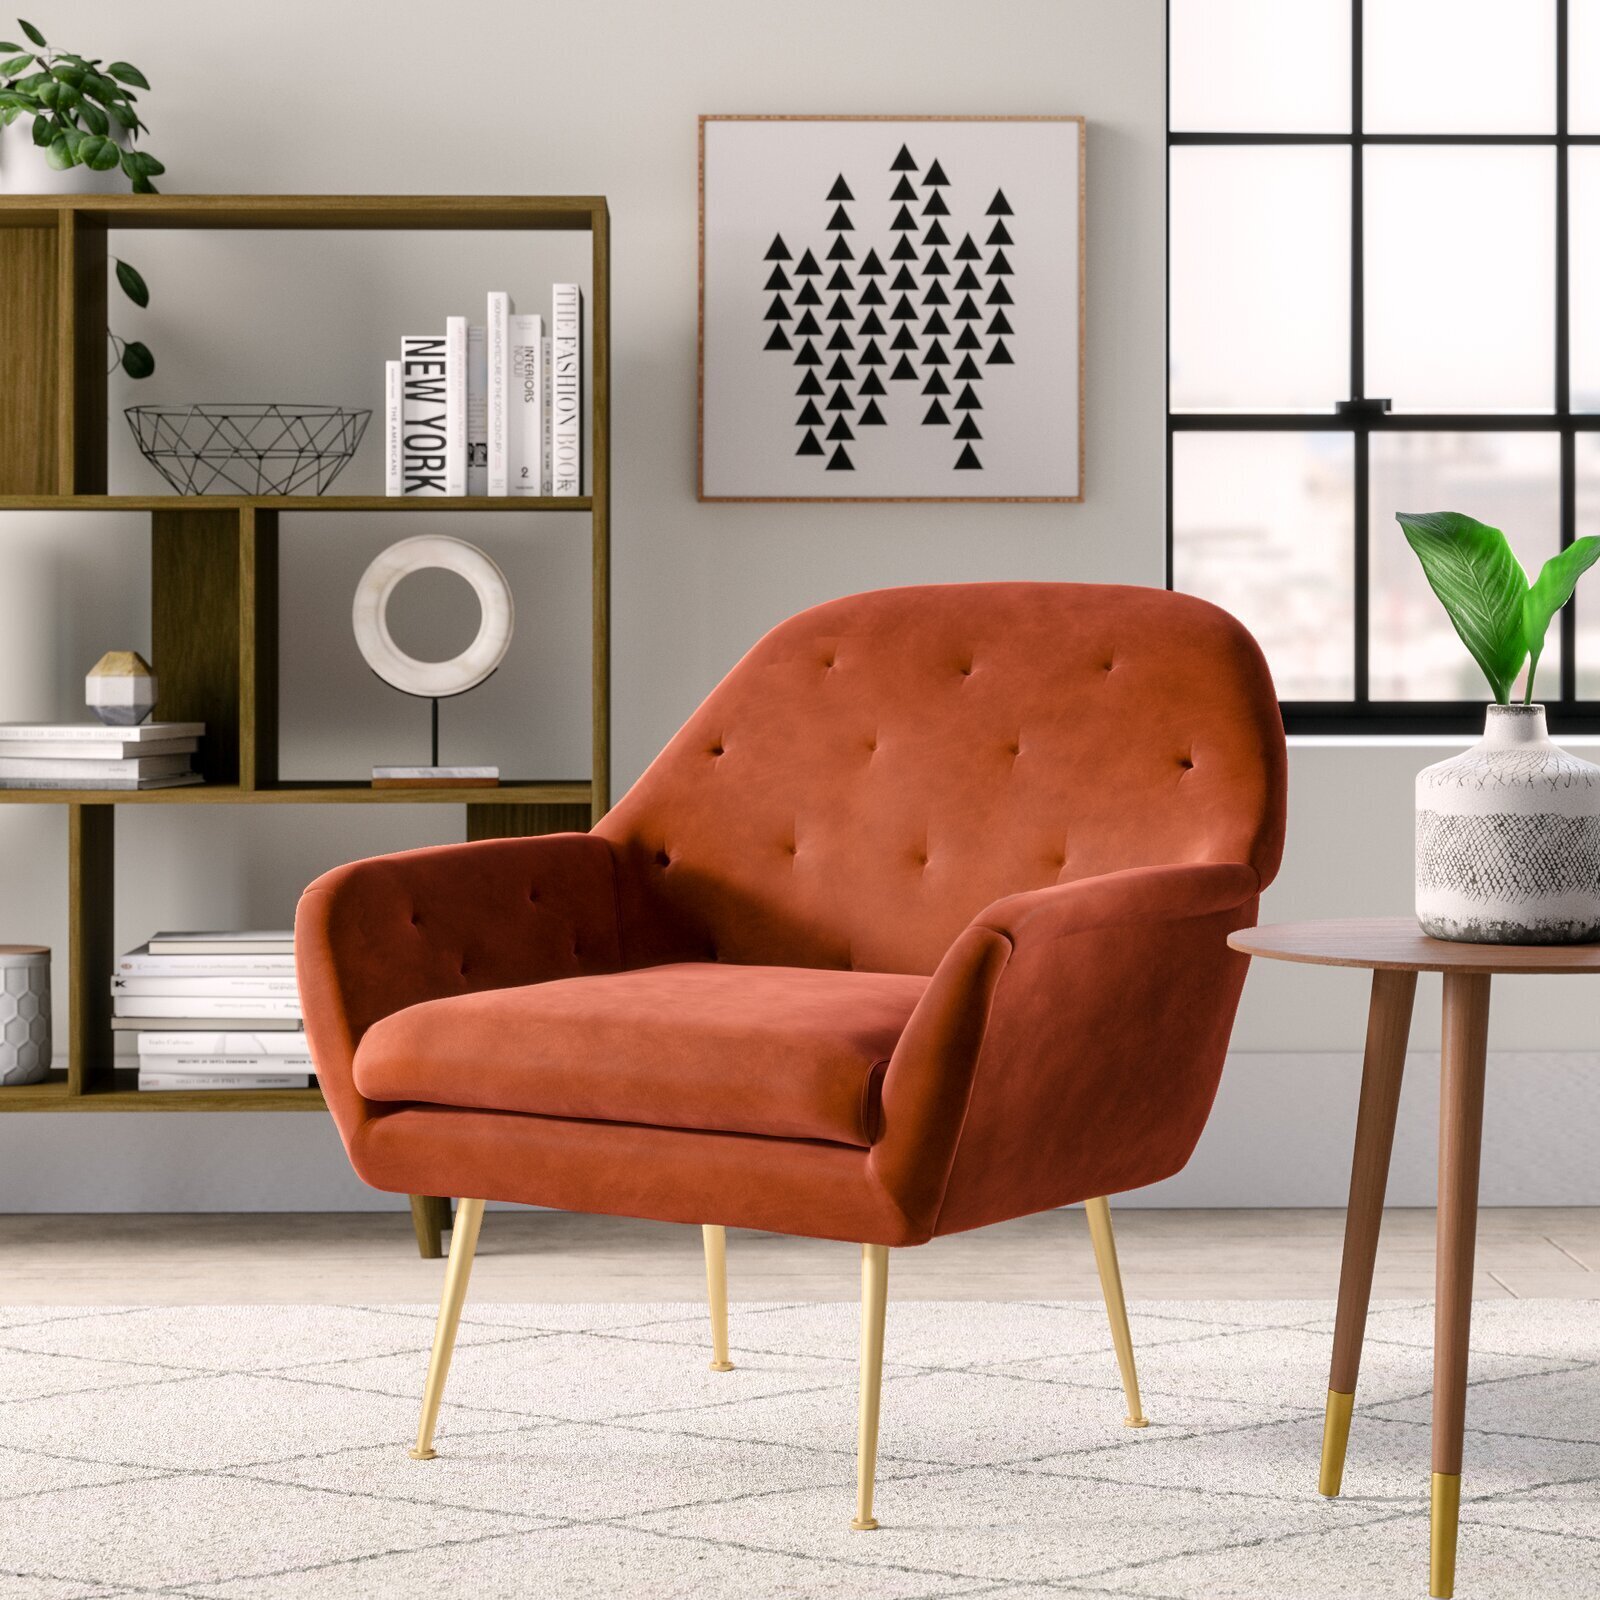 Retro Inspired Funky Accent Chair 